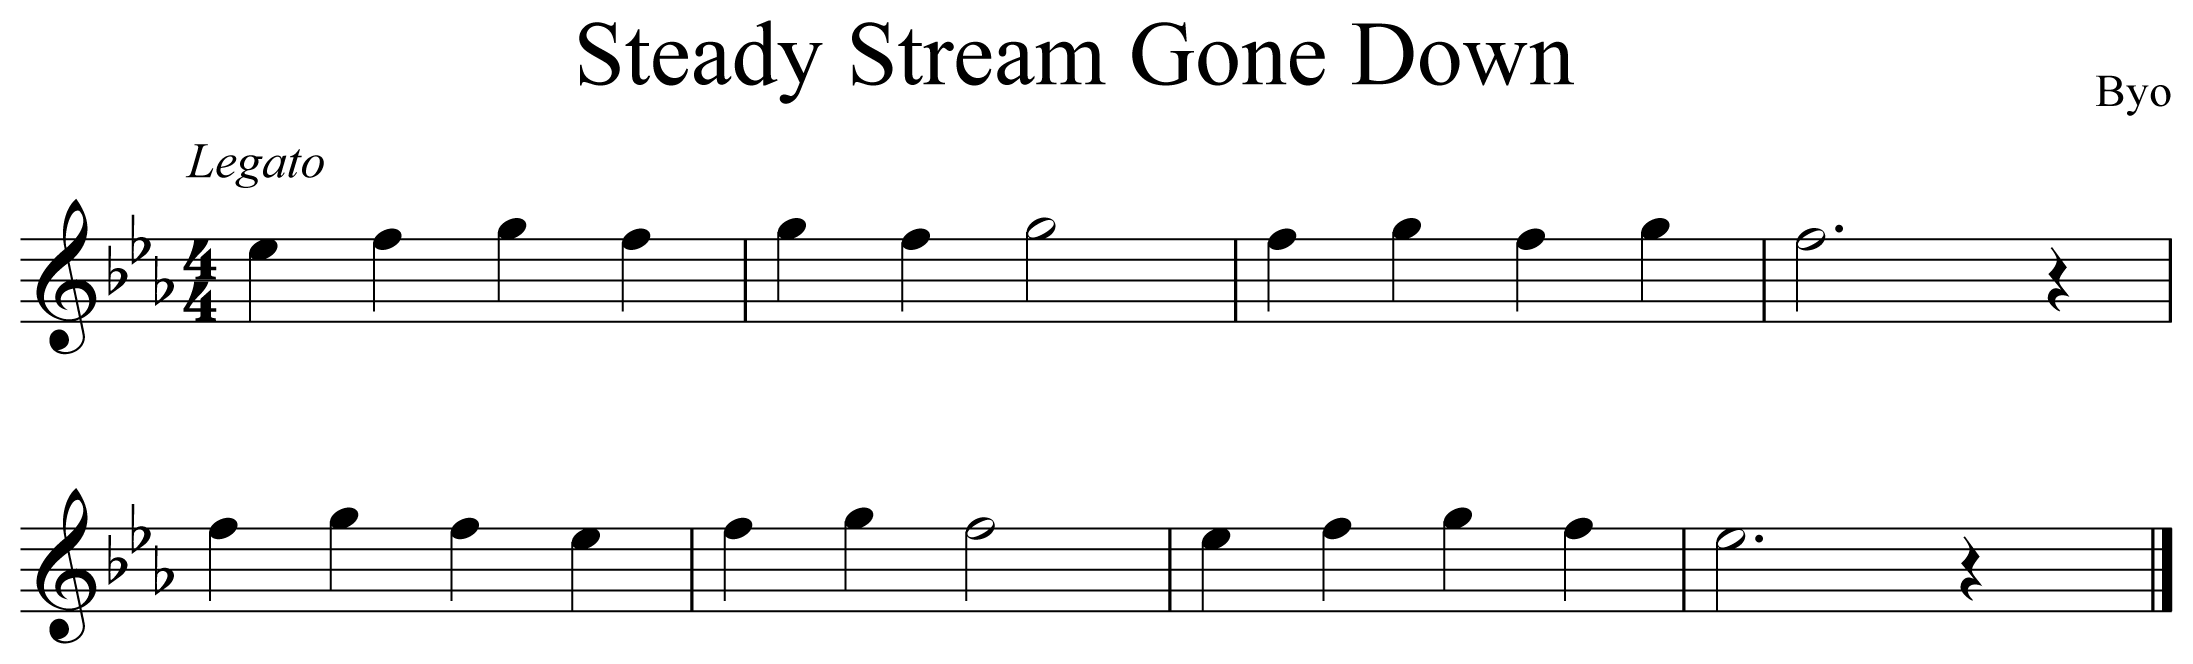 Steady Stream Gone Down Music Notation Flute